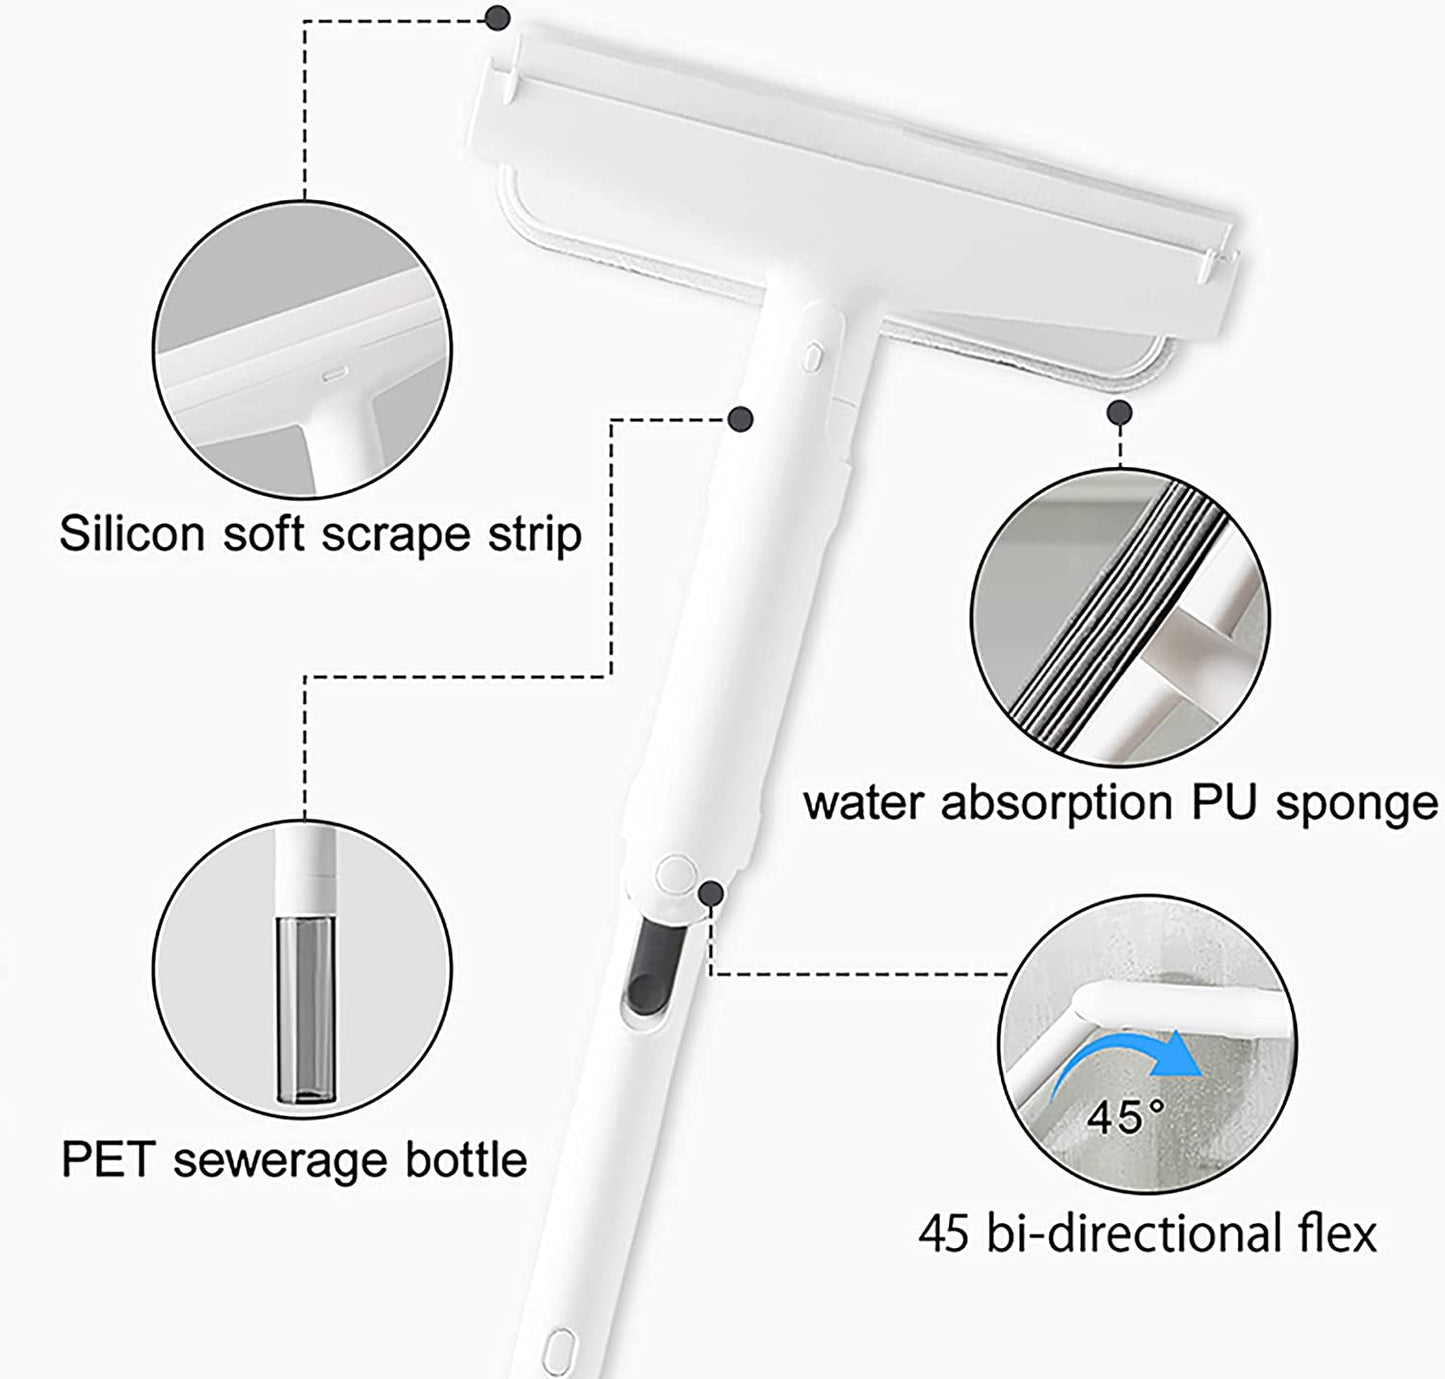 Eyliden Window Scrubber with Patent Water Collection System, Soft Silicone Squeegee & Sponge Window Scrubber and Sewage Catcher Bottle - 3 in 1 Window Cleaning Combo for Bathroom Car Office Glass